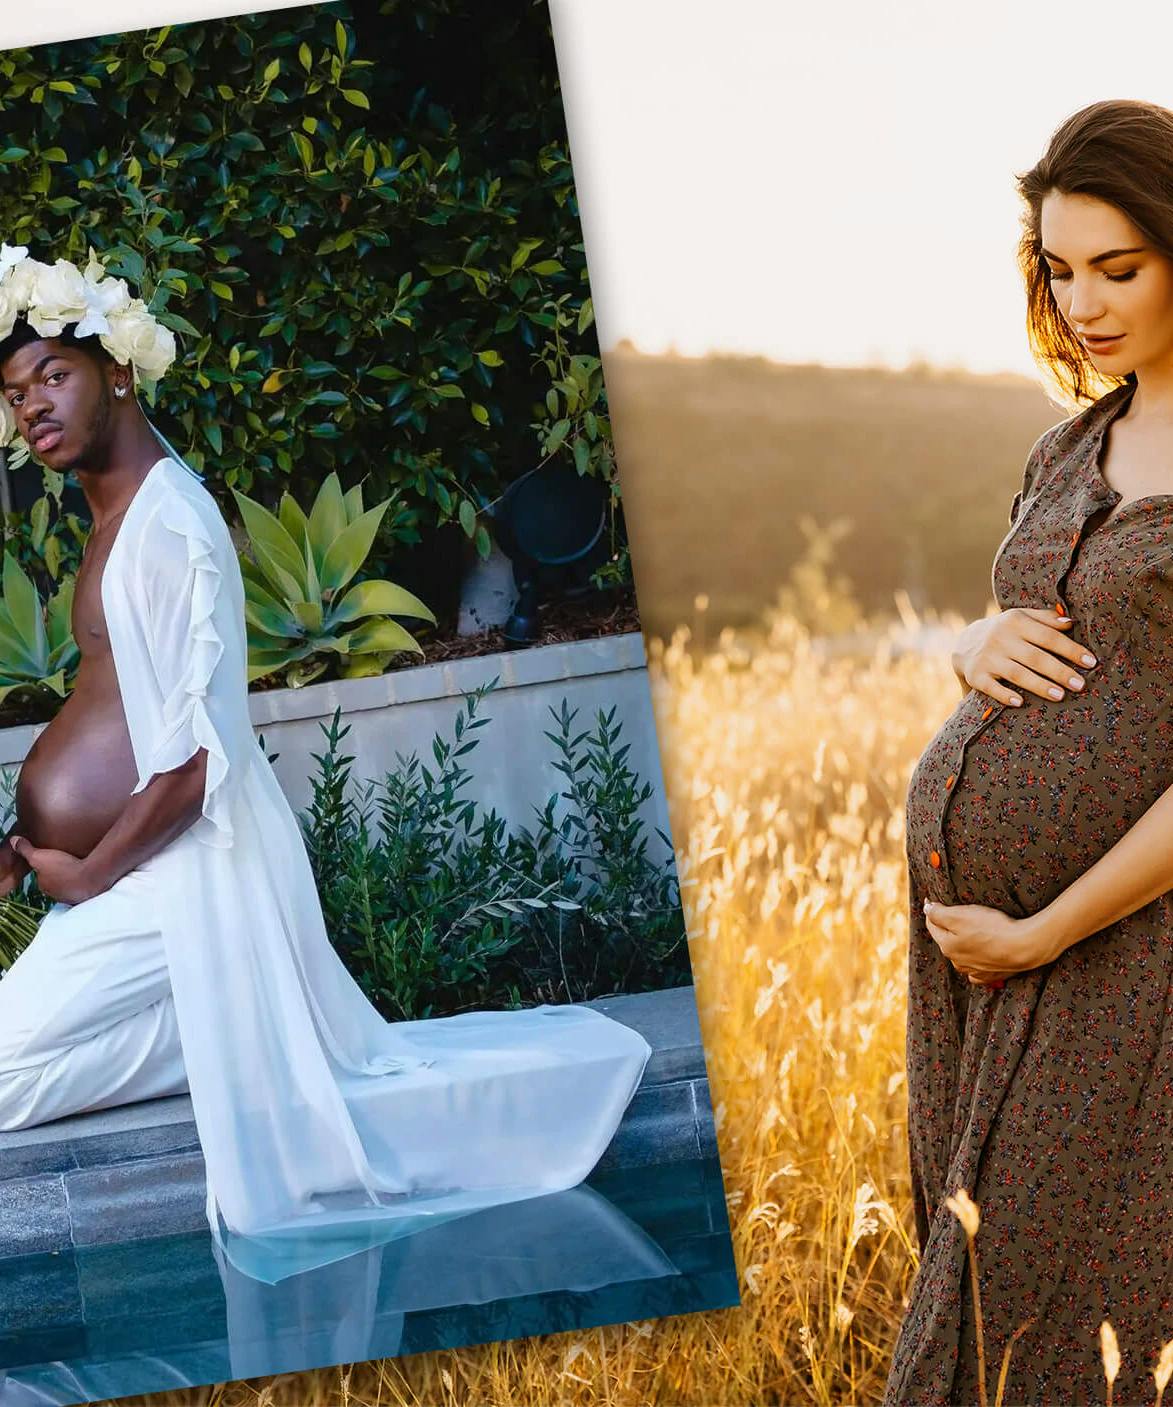 The Phony Pregnancy Of Lil Nas X Is An Appropriation Of Womanhood